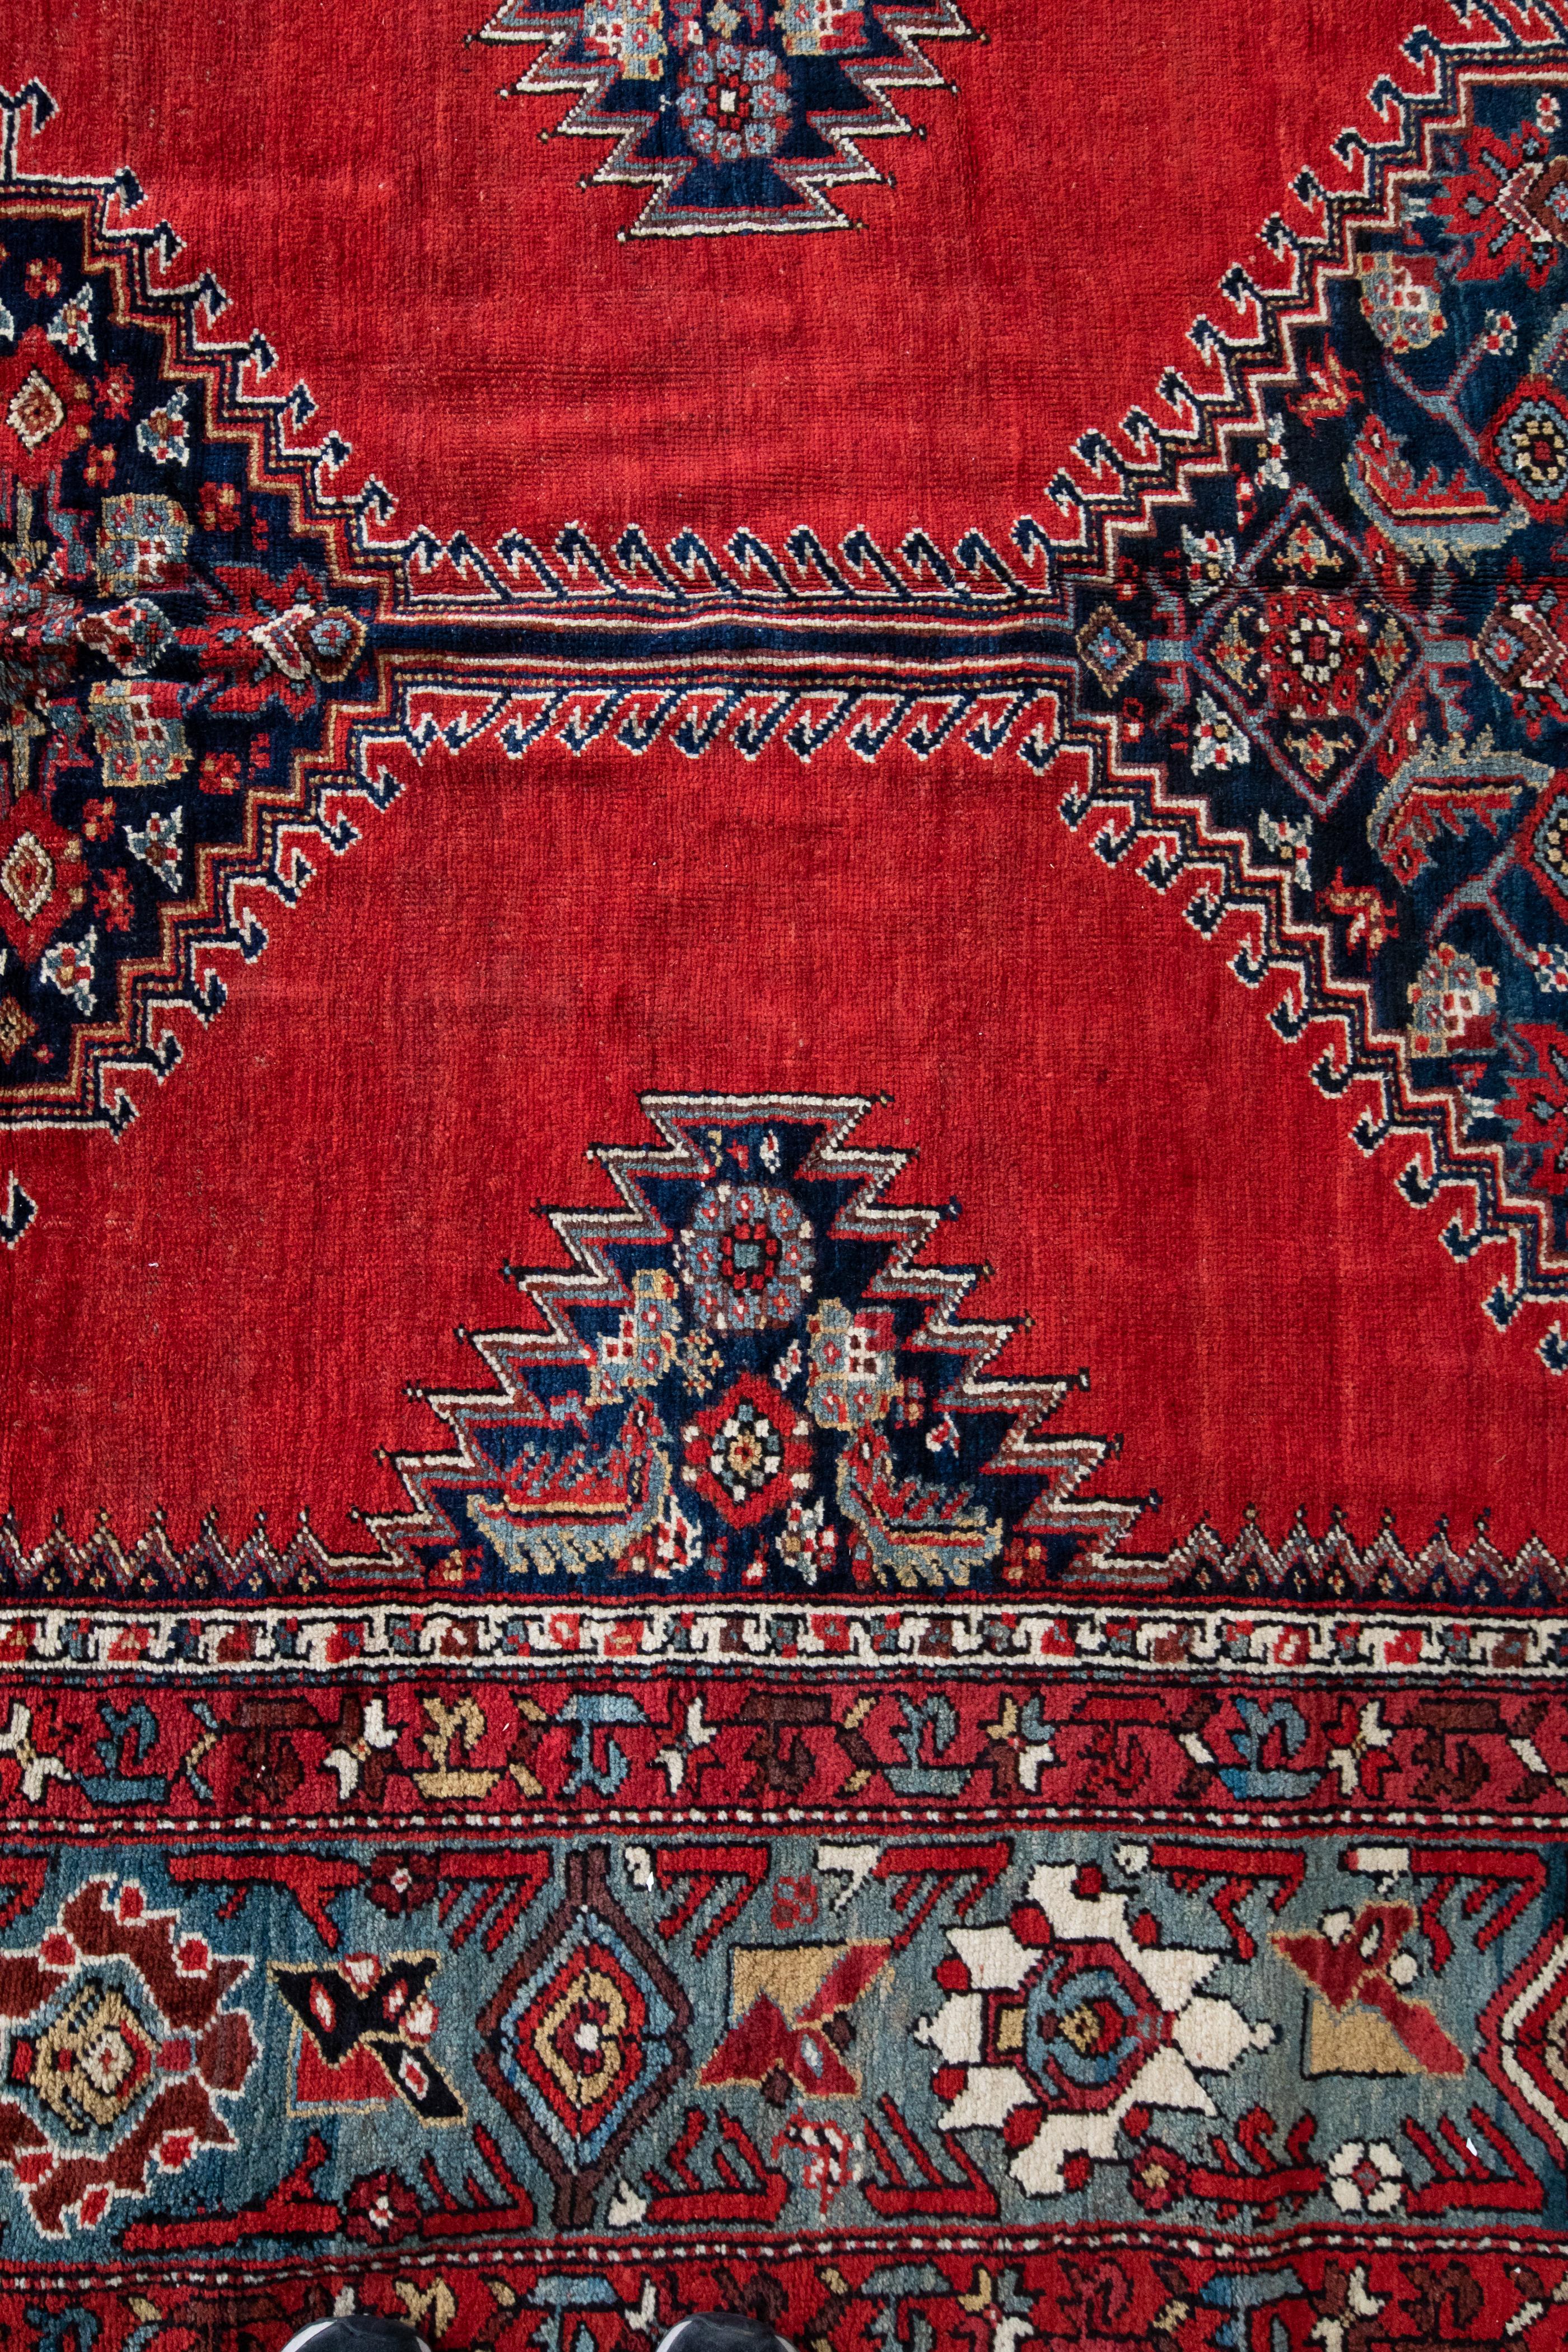 This lovely antique Northwest Persia geometric tribal red rug, circa 1900s-1920s, measures: 7.1 x 19.5 ft.

Bijar rugs are mainly woven in the town of Bijar and its surrounding villages. Bijar is located in the province of Kurdistan in Northwest of